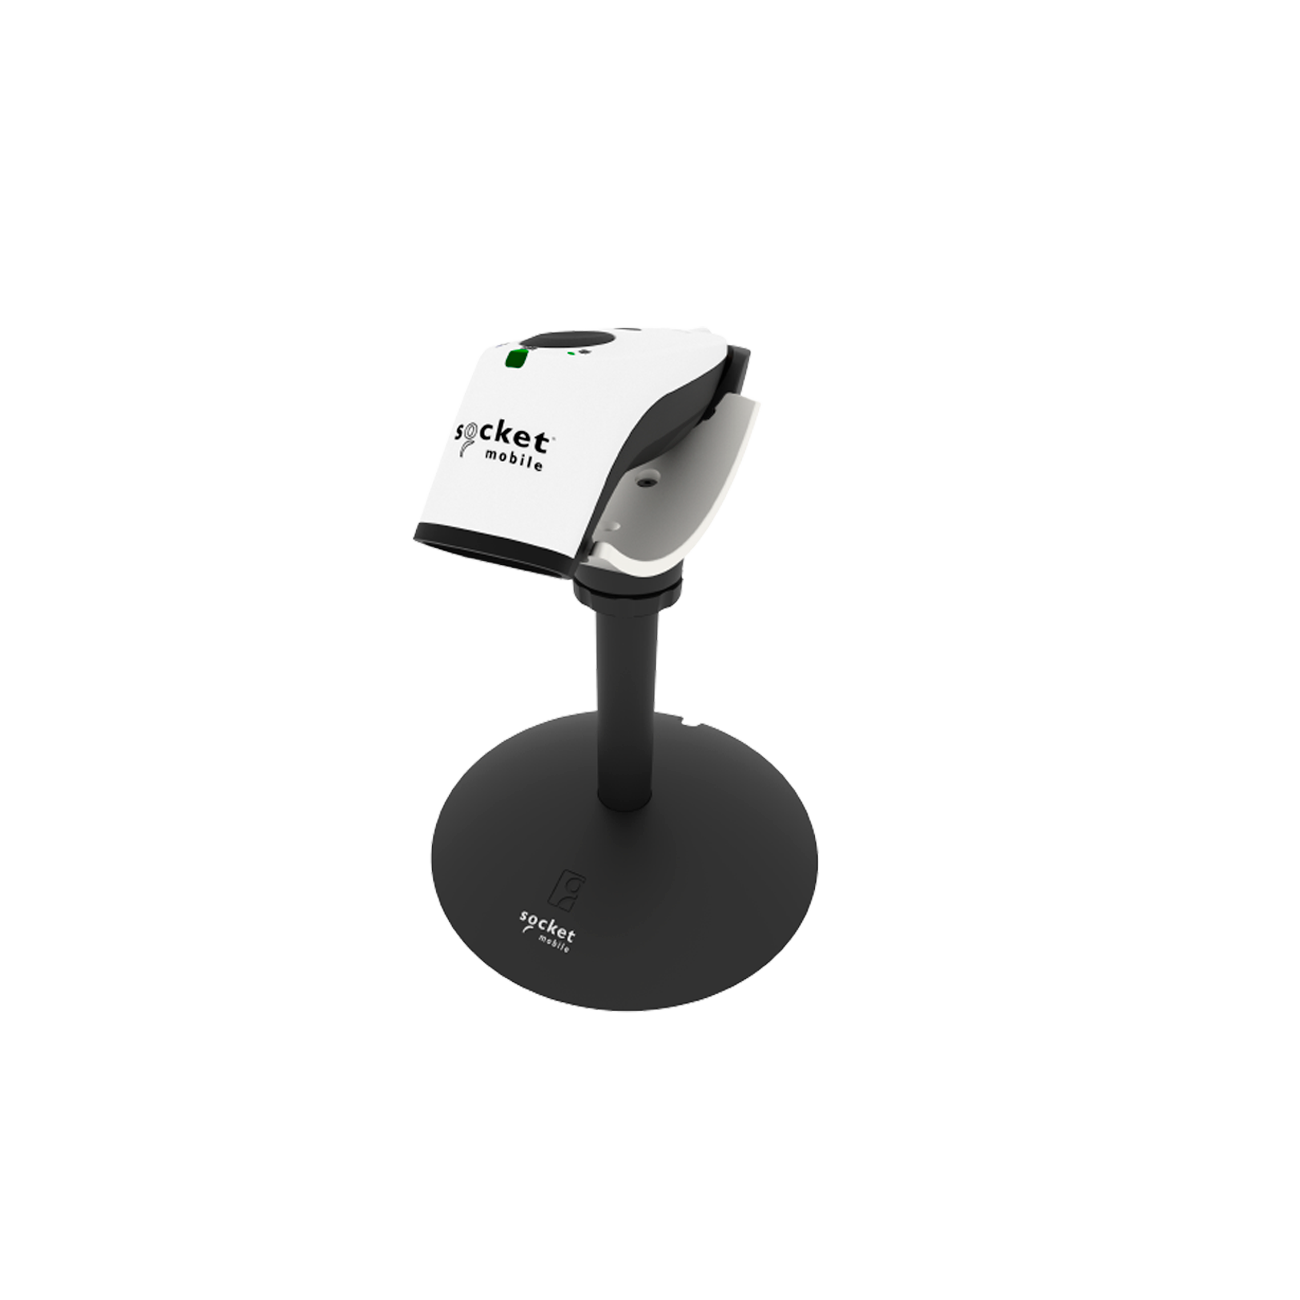 Socket Mobile 2D Bluetooth Barcode Scanner with Dock (S720)